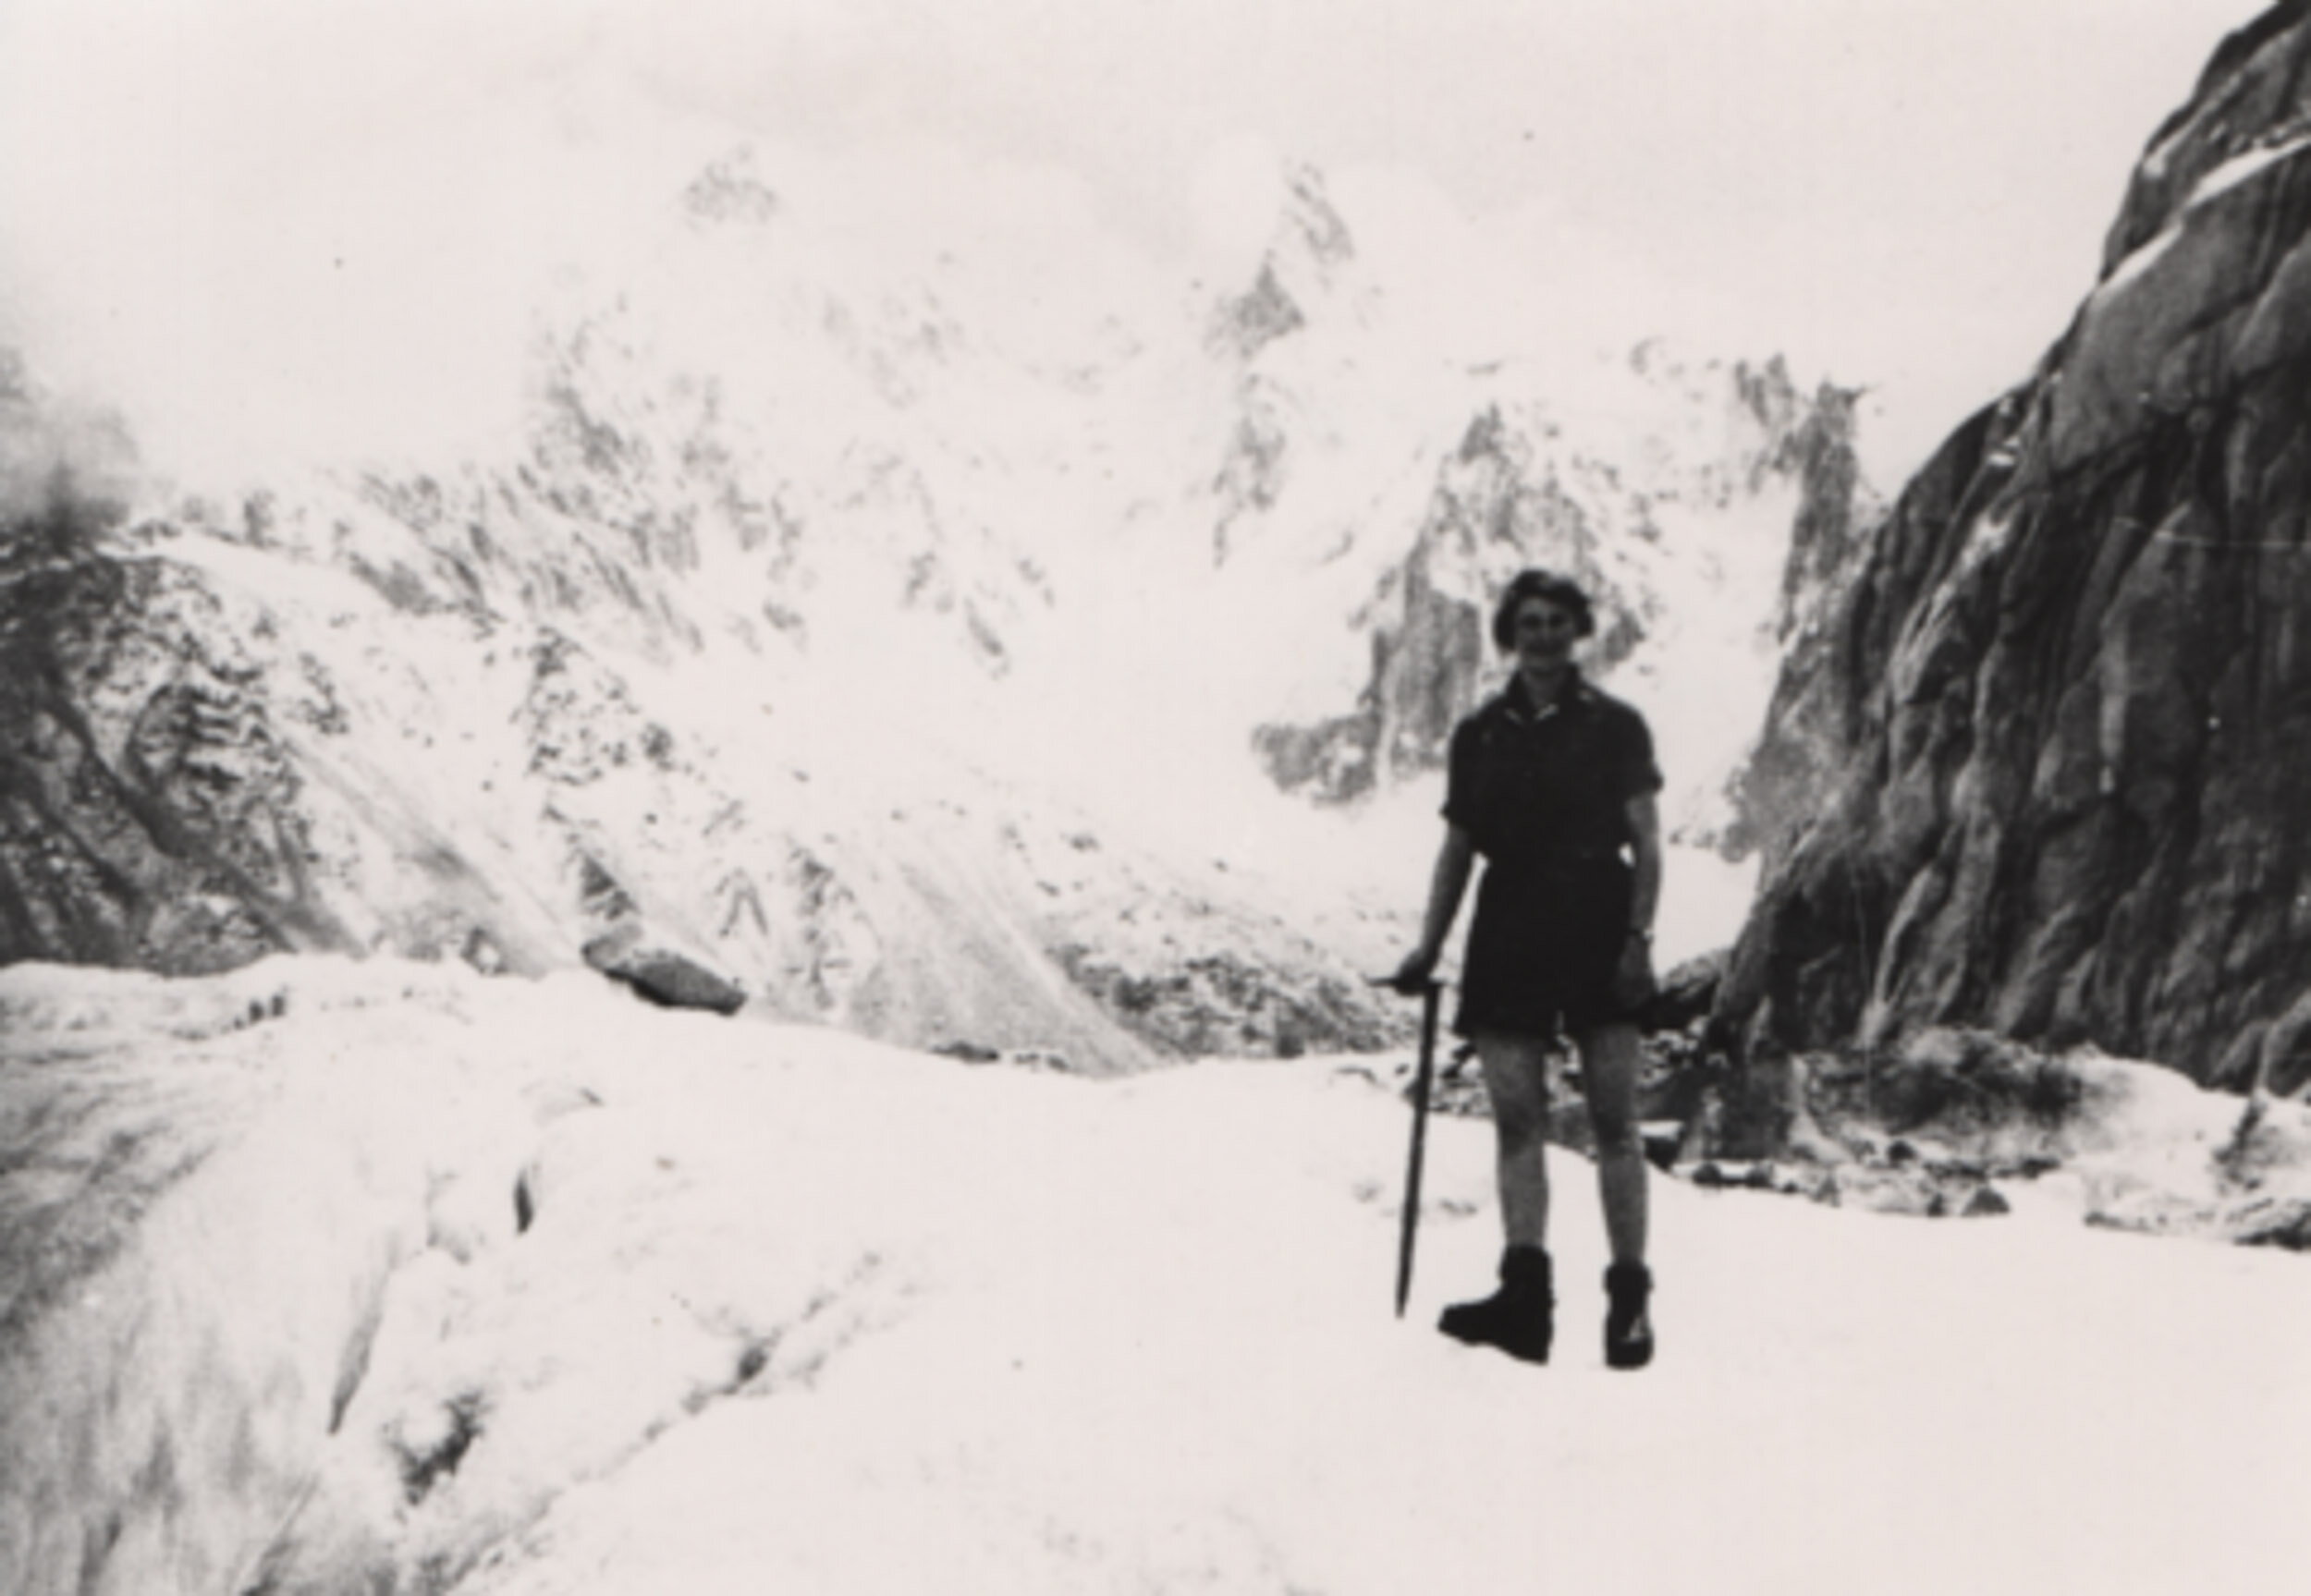 Denise Wilson on the Mer de Glace - first trip to the Alps, 1954